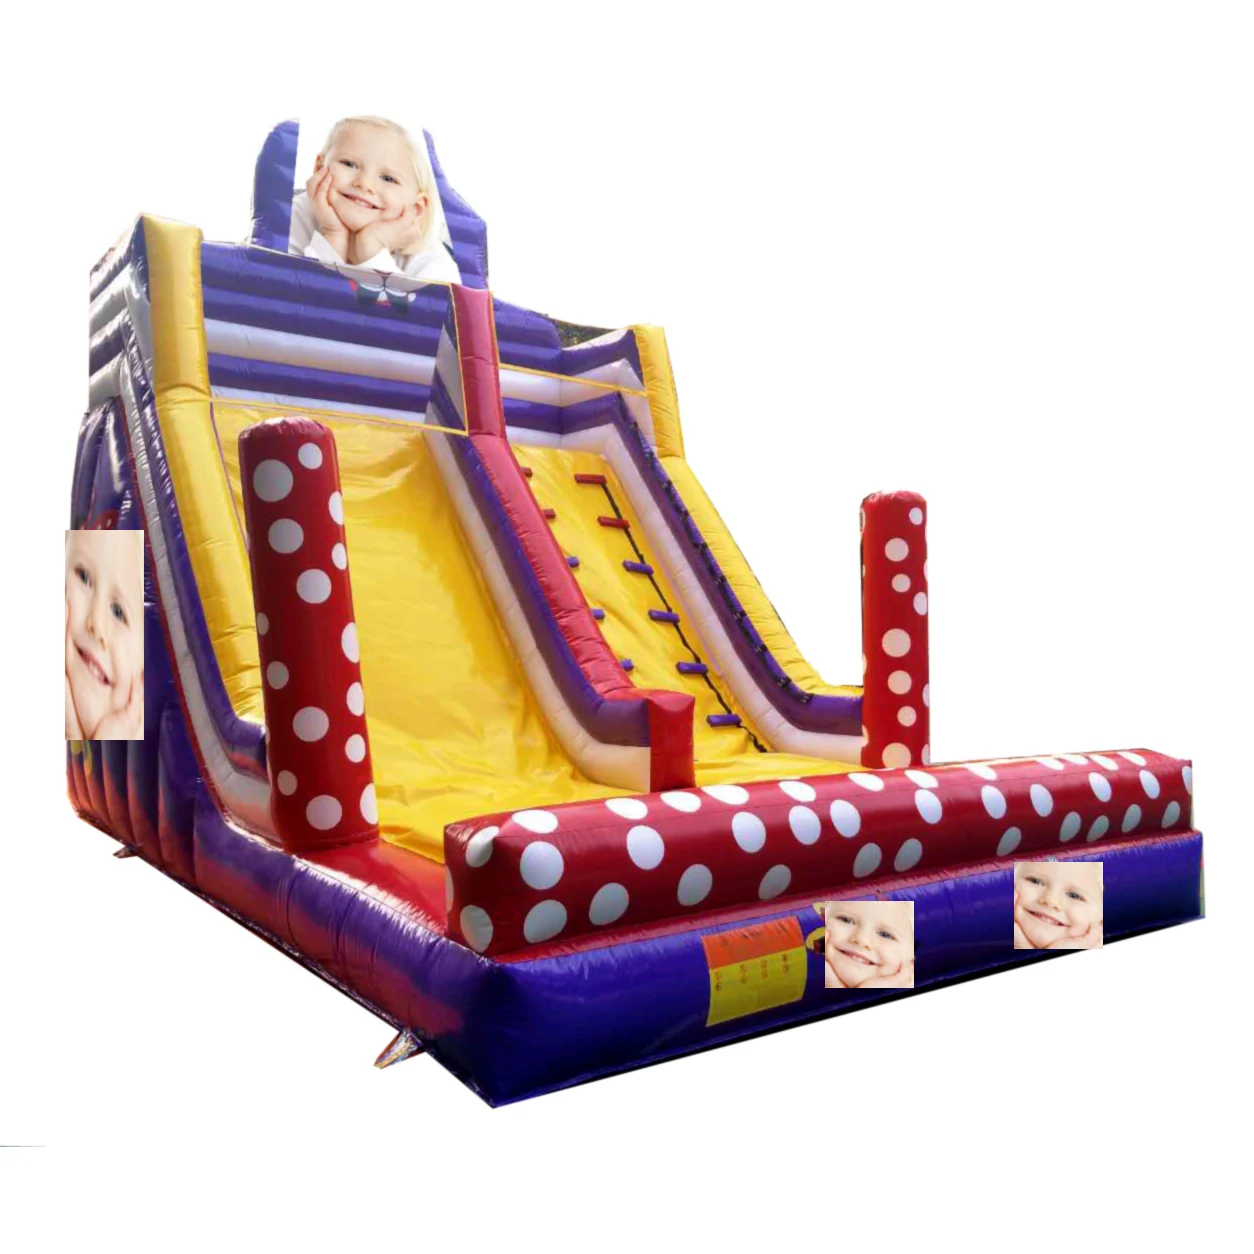 

YLWCNN Inflatable Combo Slide Bouncer With CE/UL Blower Inflatable Playground Parks YLW-Bouncer Toys 0823